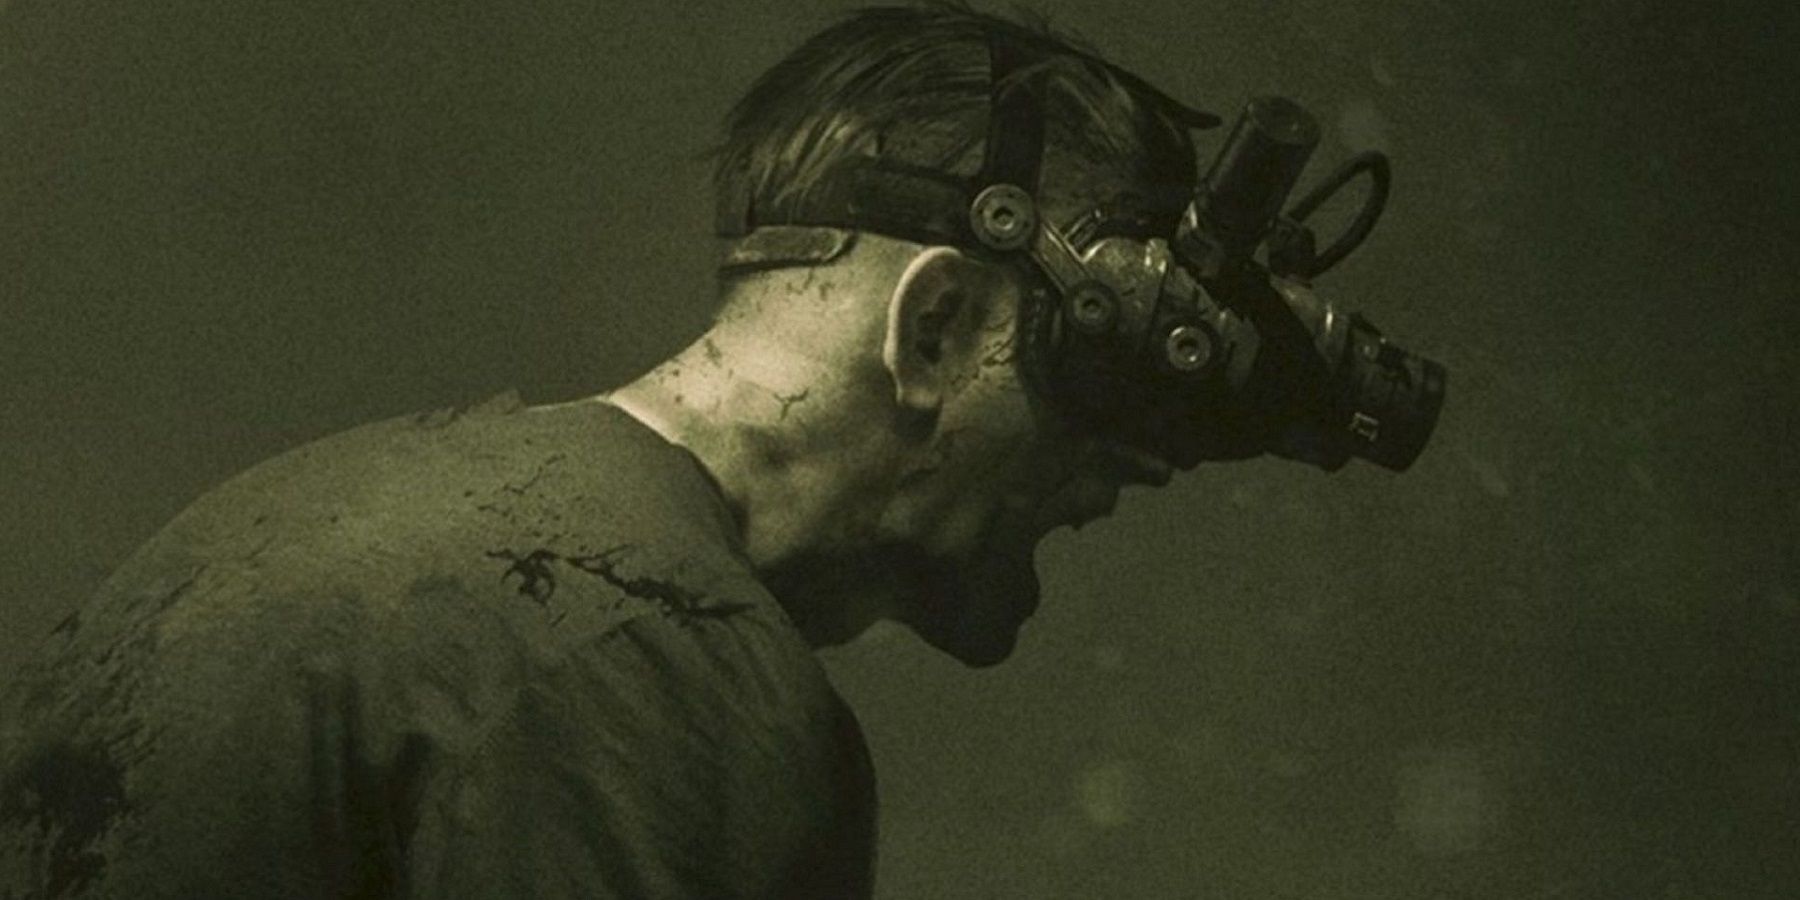 Image from Outlast Trials showing someone wearing night vision goggles.